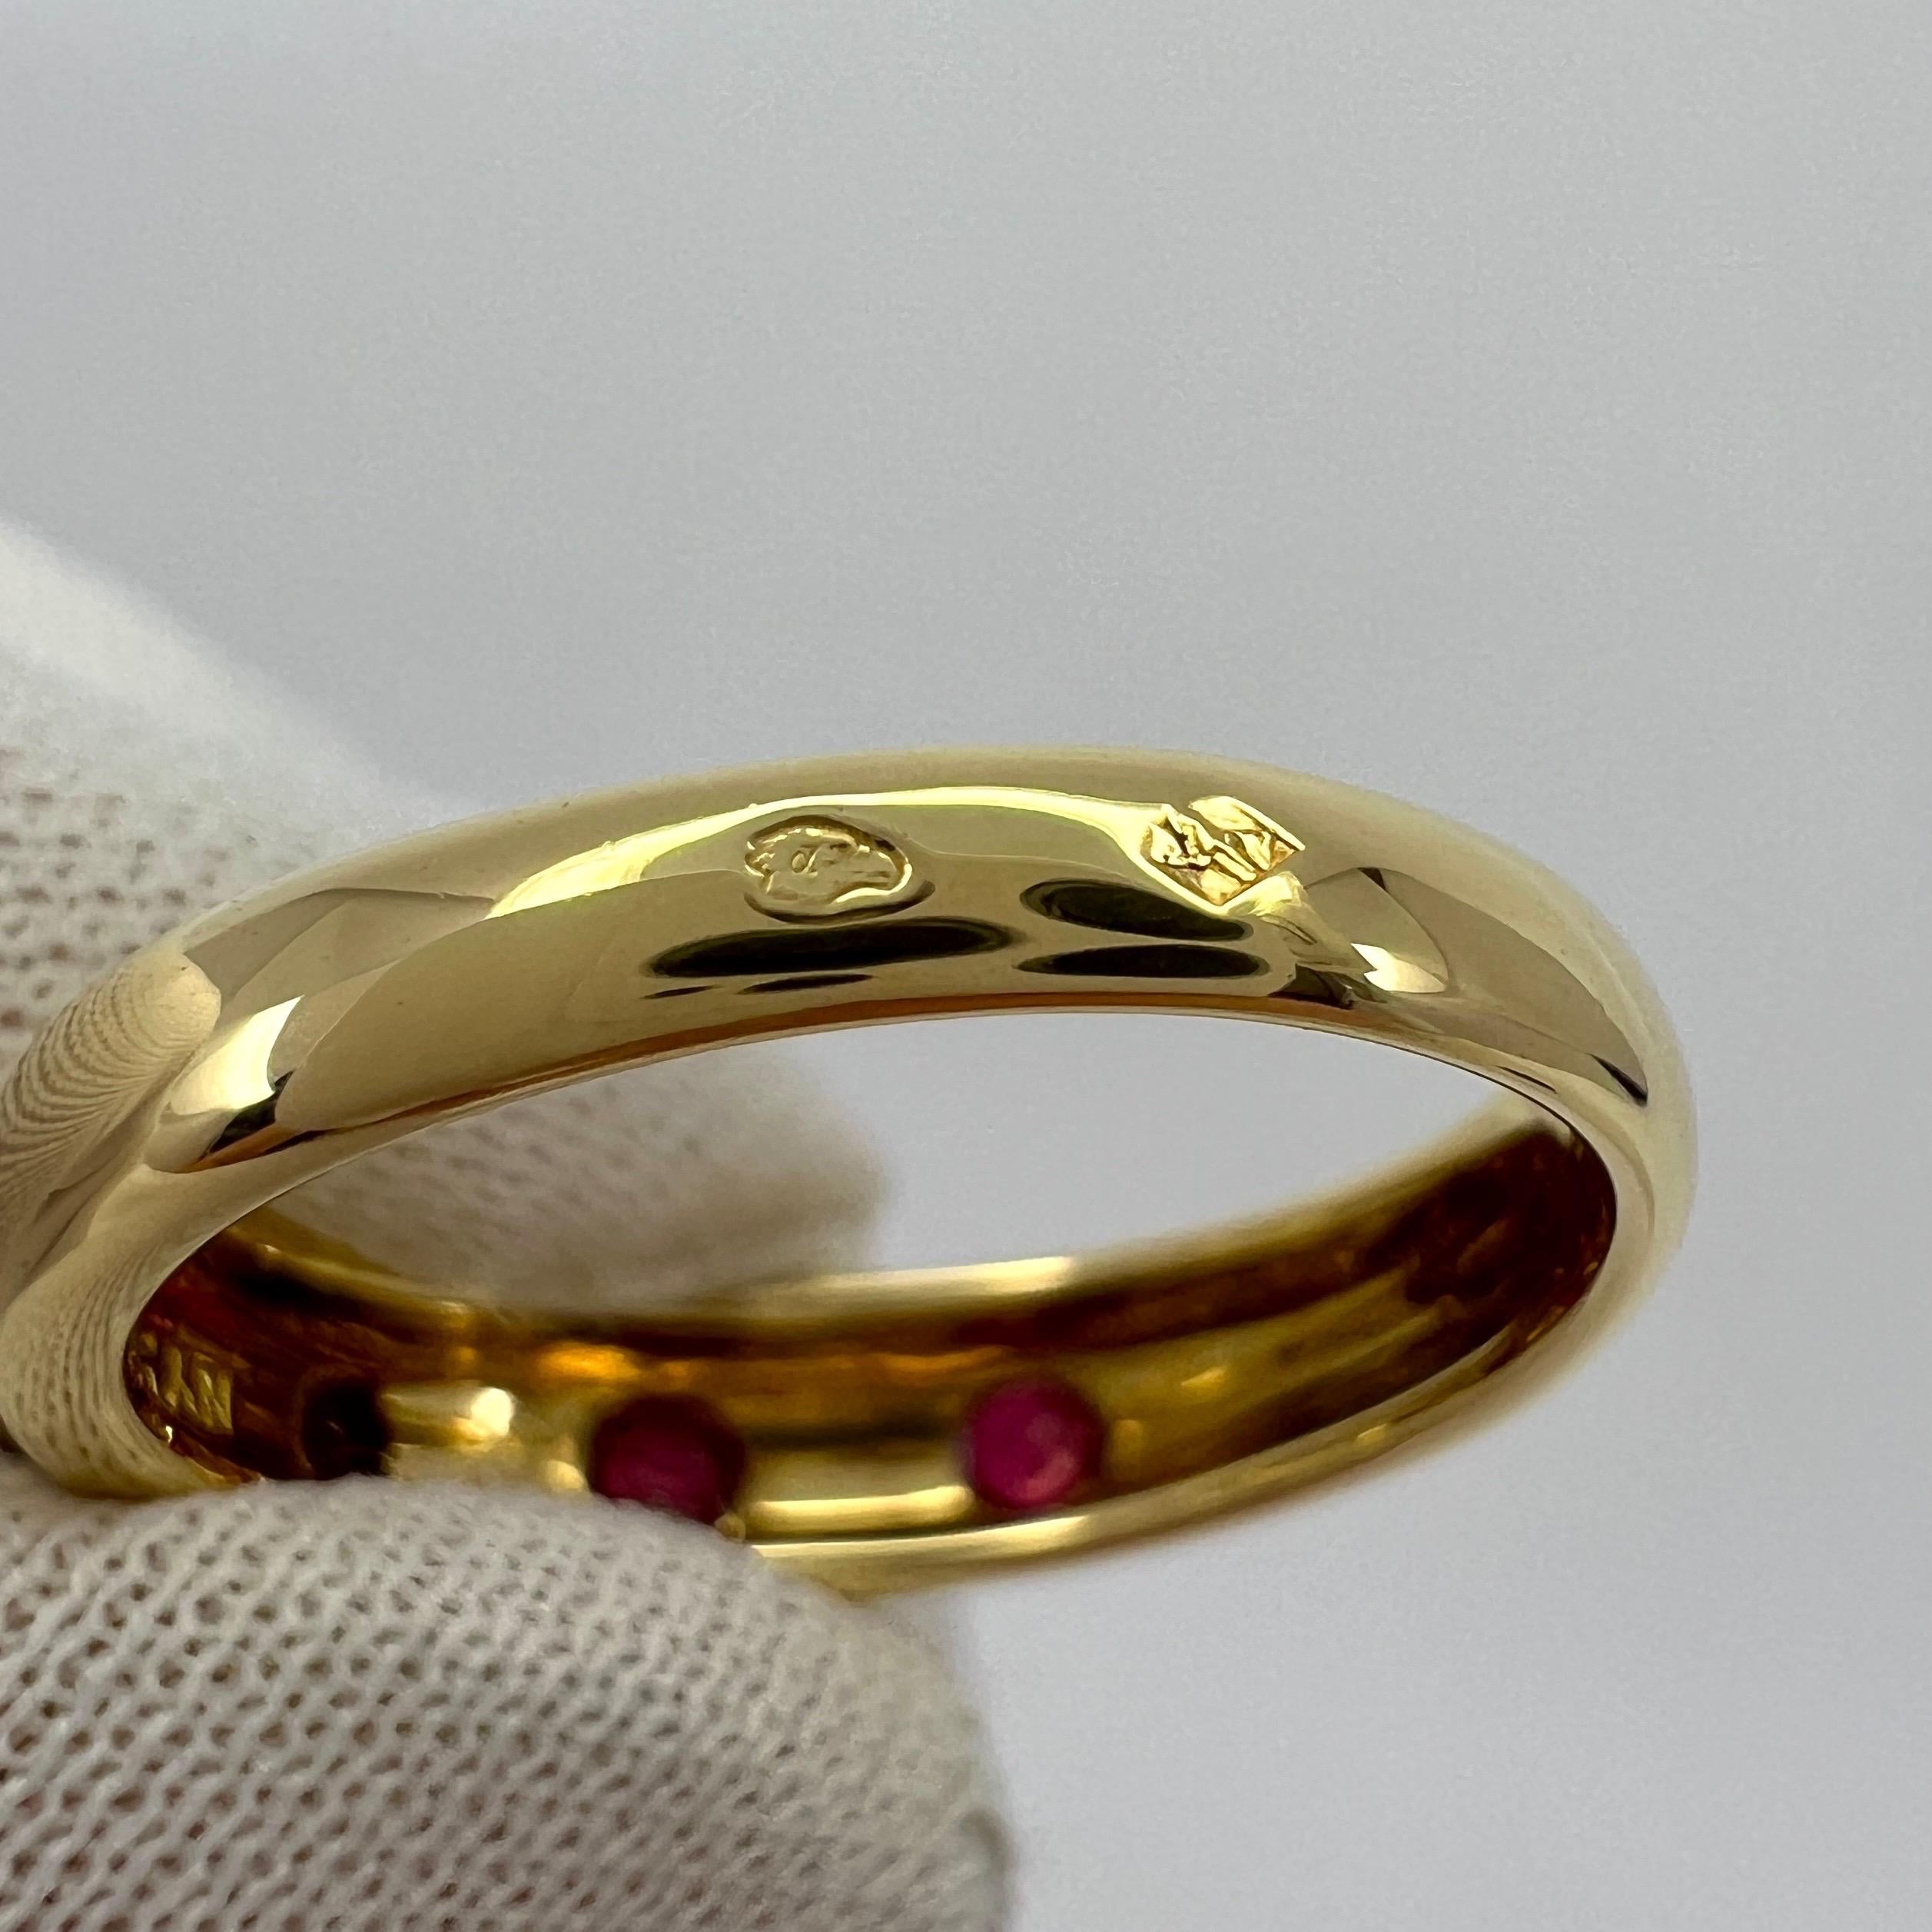 Rare Vintage Van Cleef & Arpels Star Set Ruby 18k Yellow Gold Three Stone Ring For Sale 6